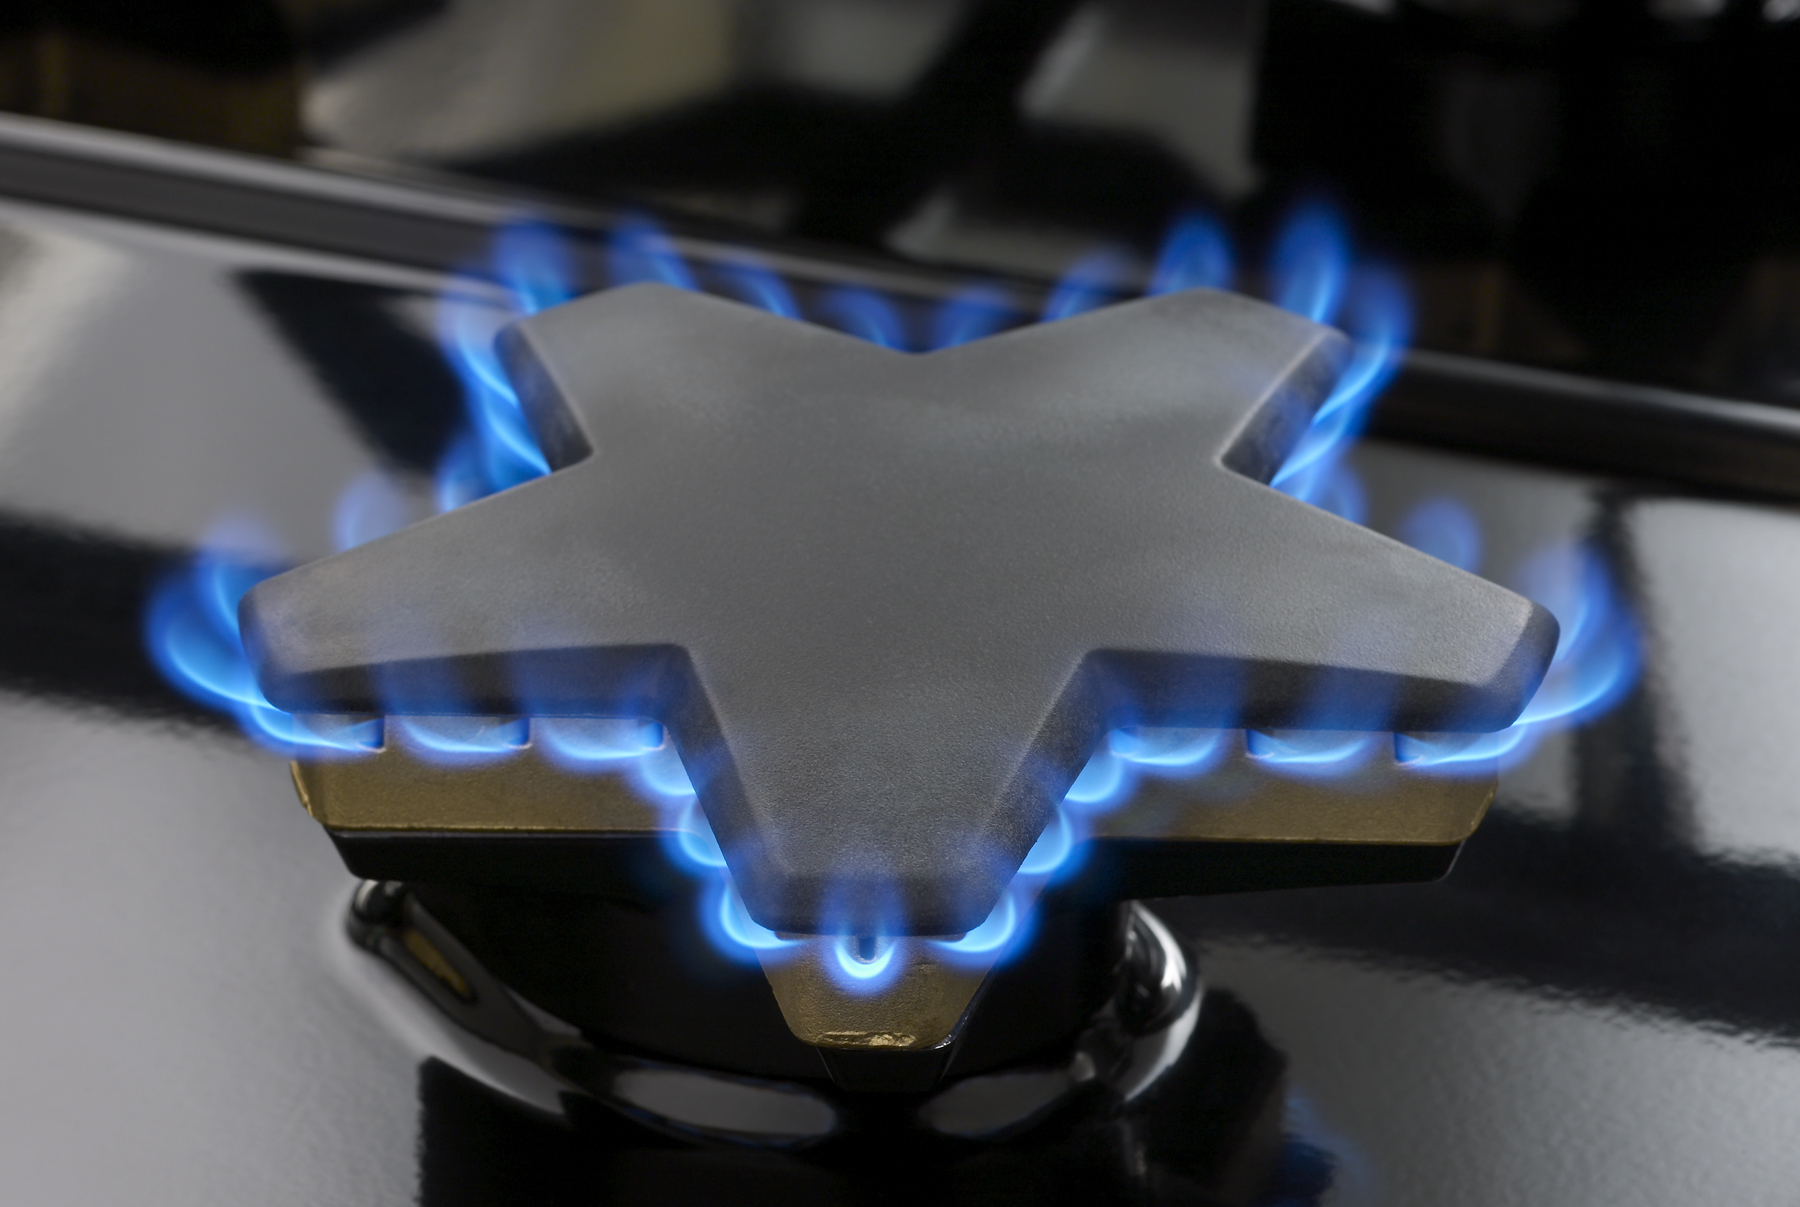 Taming the Flame: Why Homeowners Love the New Gas Burners